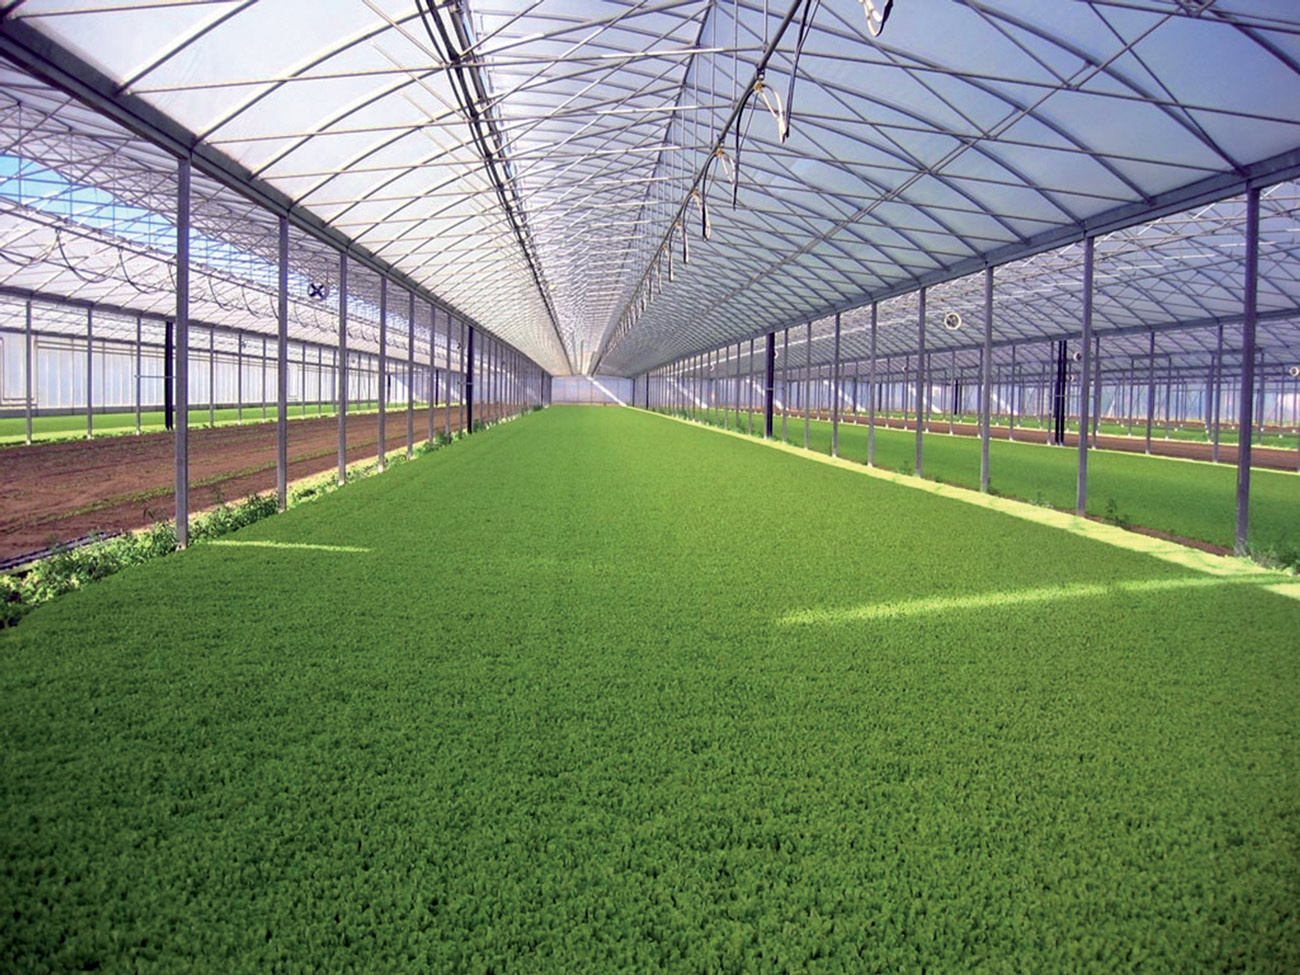 Benefits of Polycarbonate Panels for Agriculture